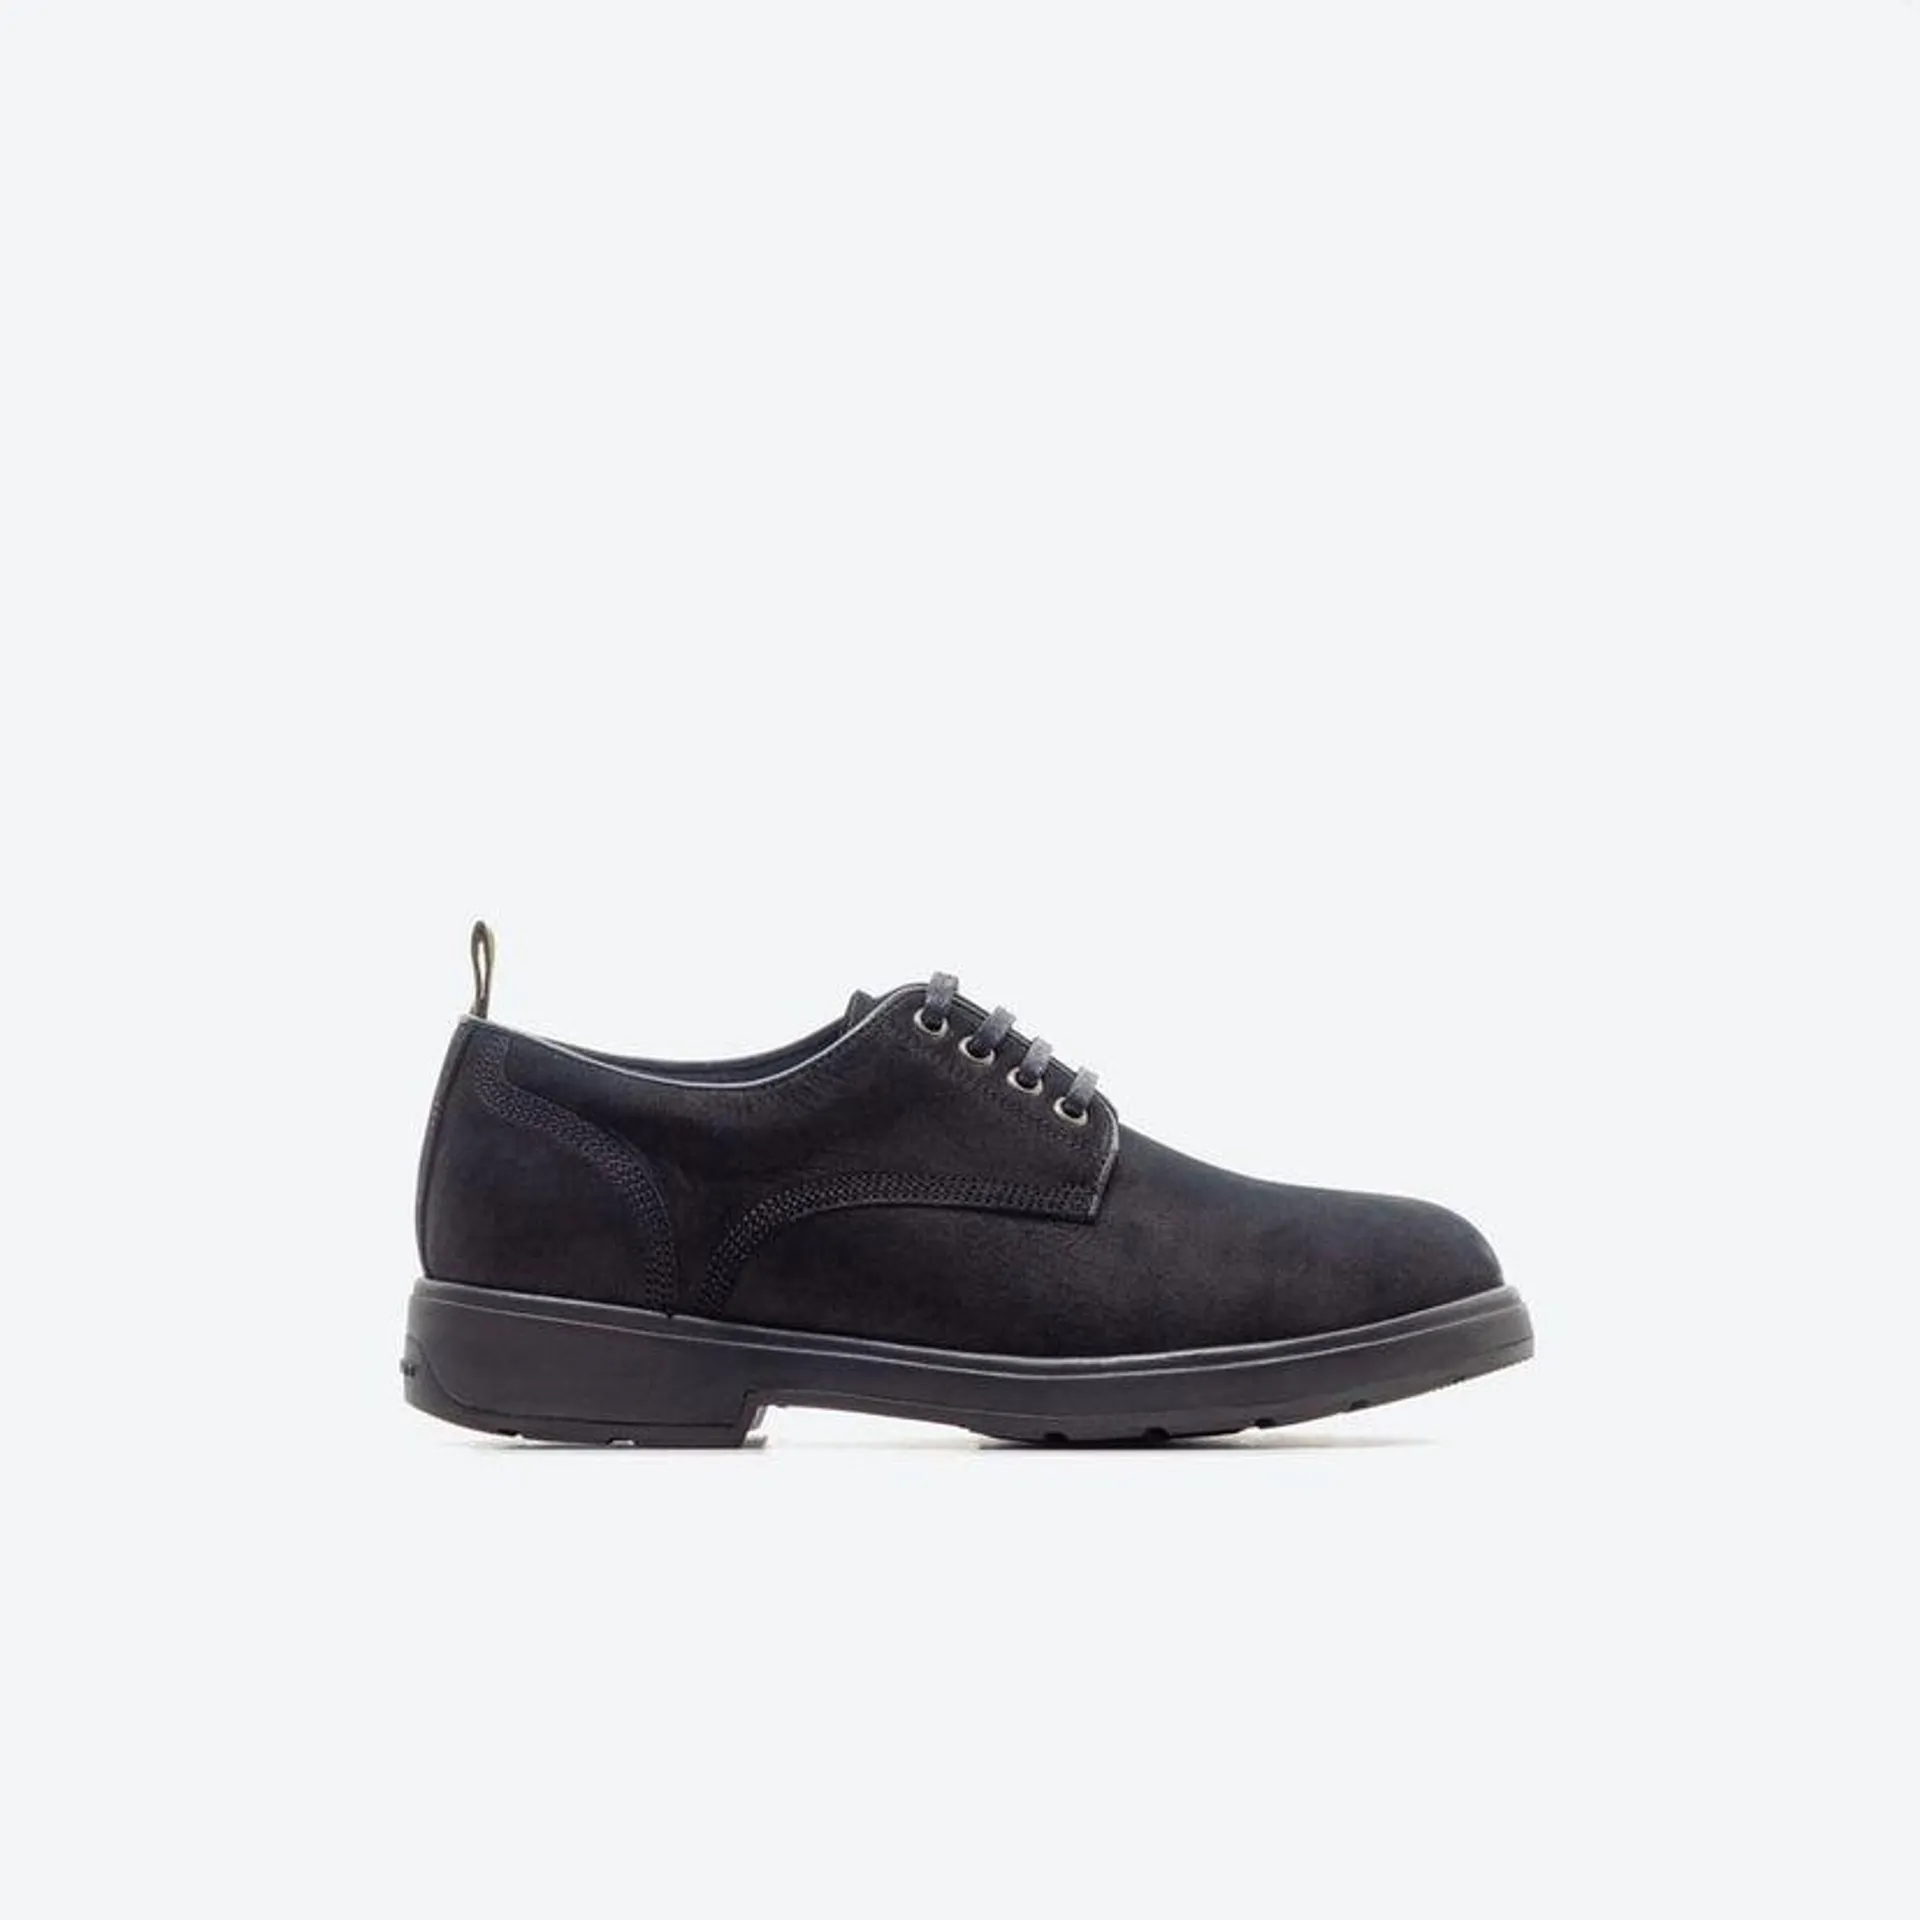 The High-performance Workwear Derby Zapato Casual Hombre Freeport Znda Negro